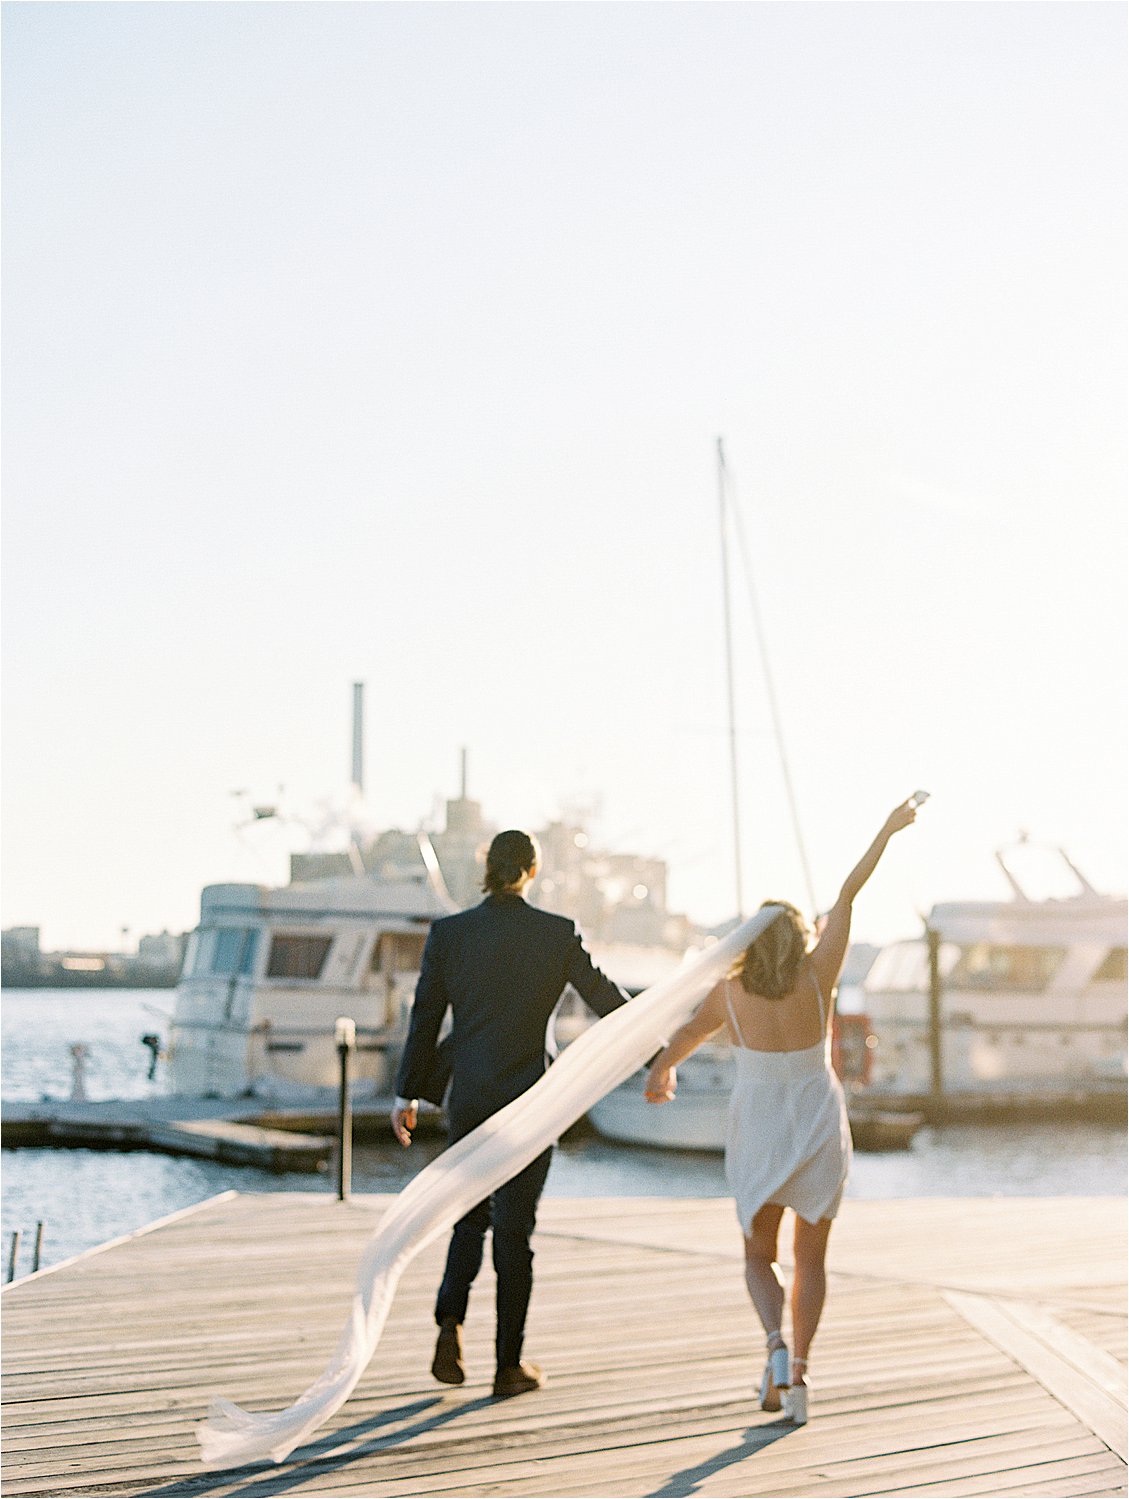 Fun Fells Point Engagement session in formalwear with film wedding photographer Renee Hollingshead and Pop the Cork Designs